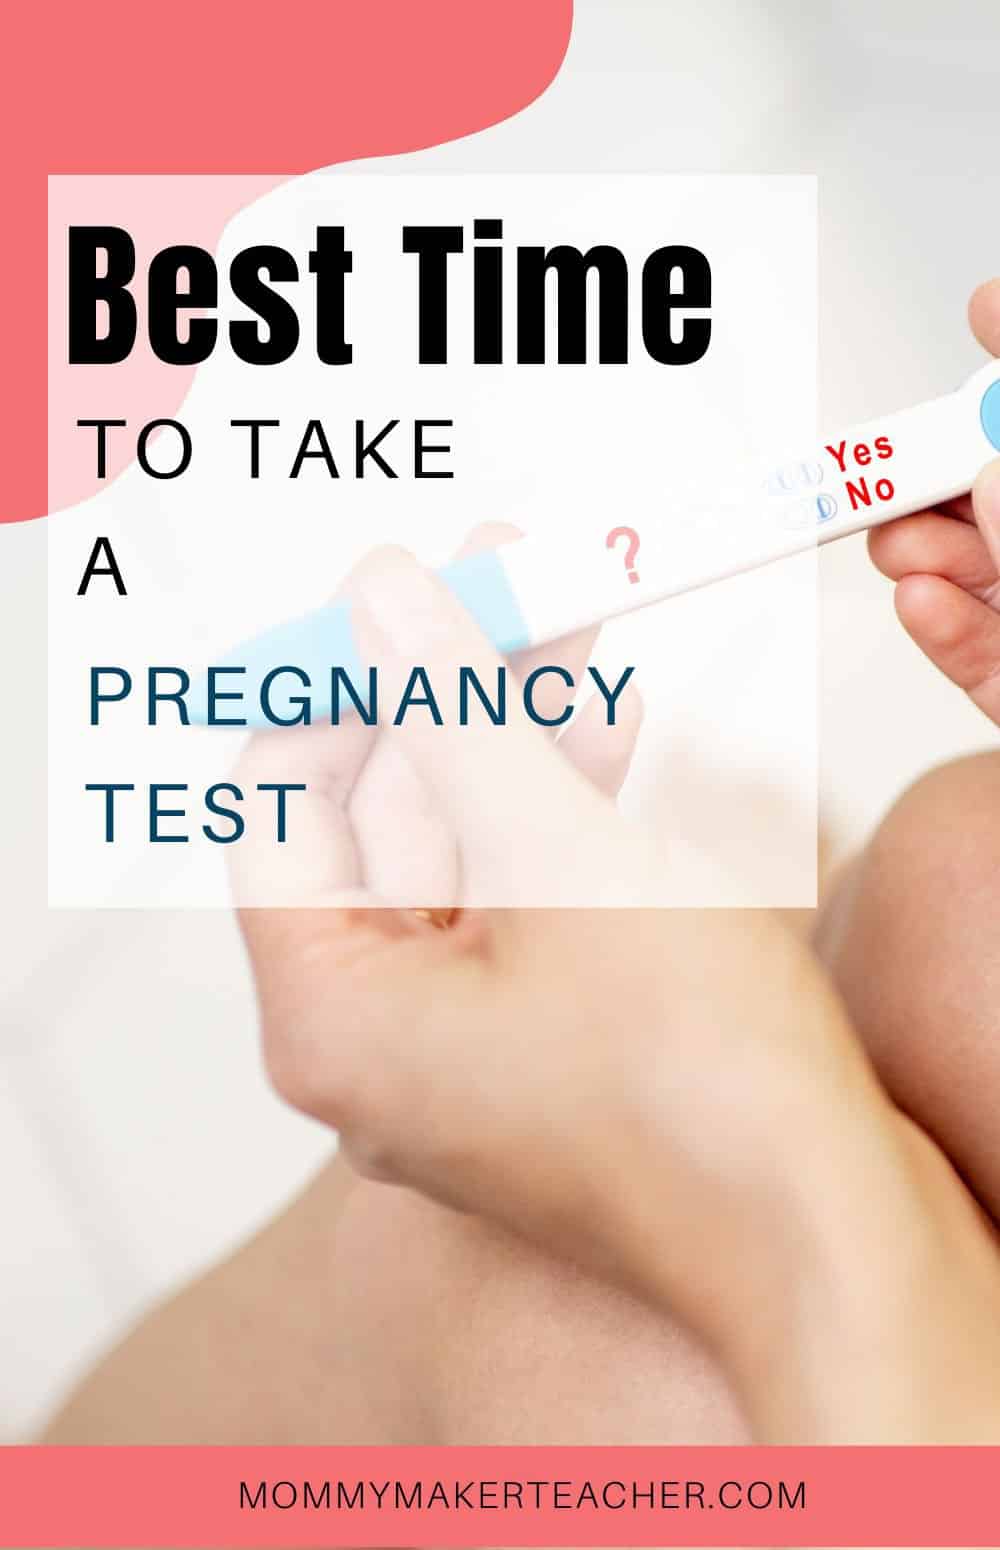 Best time to take a pregnancy test. Woman sitting on toilet holding a pregnancy test in her hands.